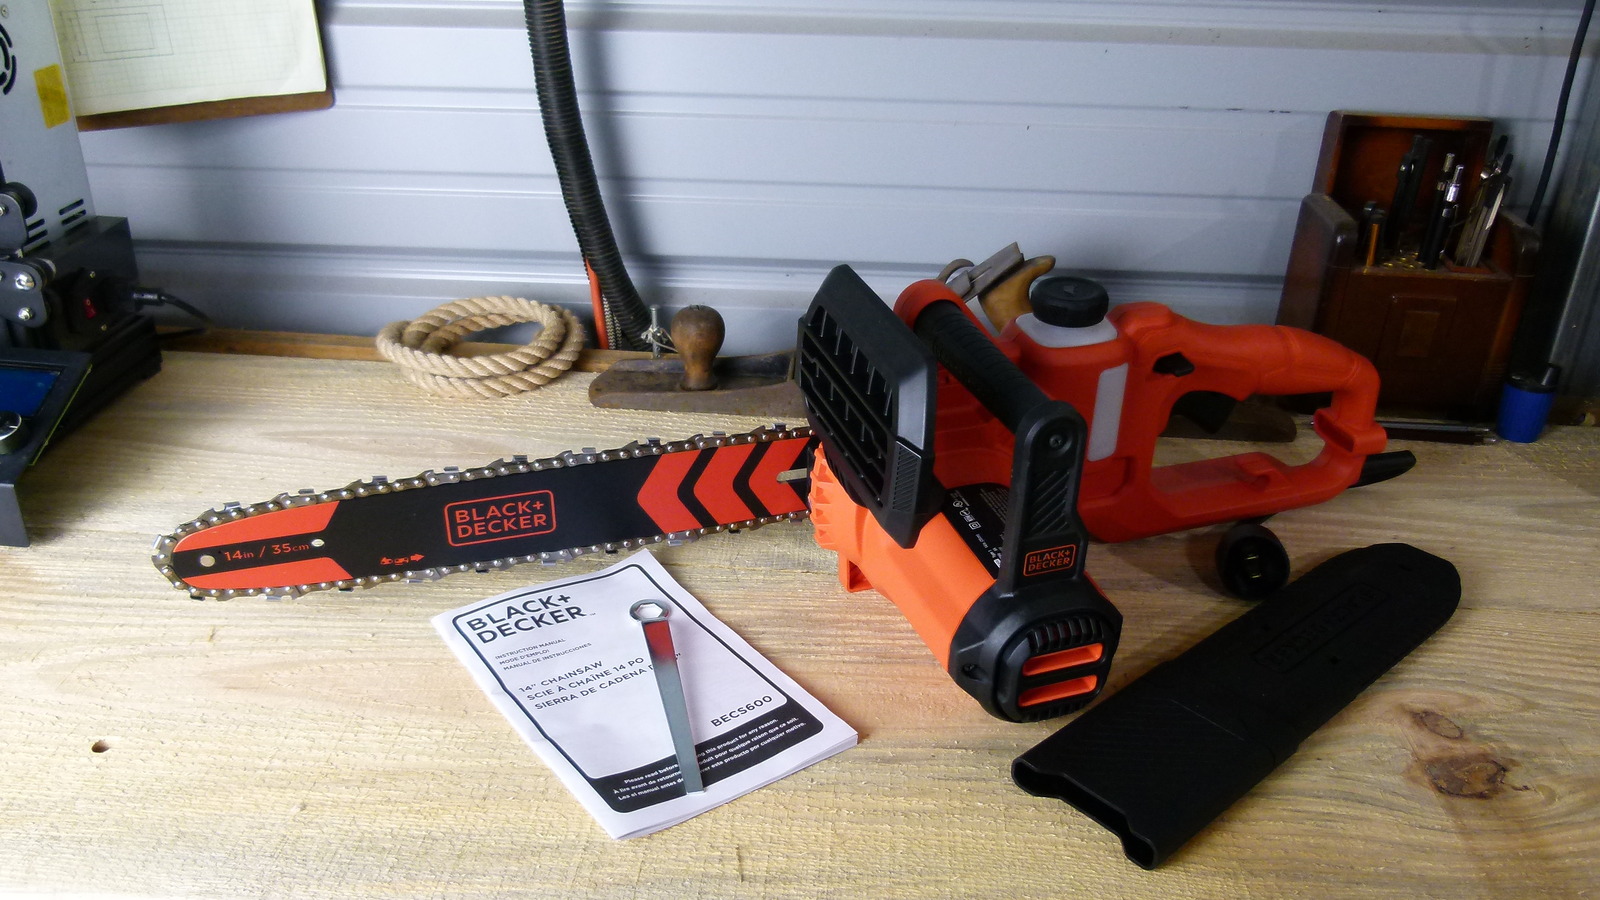 https://www.housedigest.com/img/gallery/we-tried-the-cheapest-mini-chainsaw-at-home-depot-heres-how-it-went/l-intro-1664295001.jpg